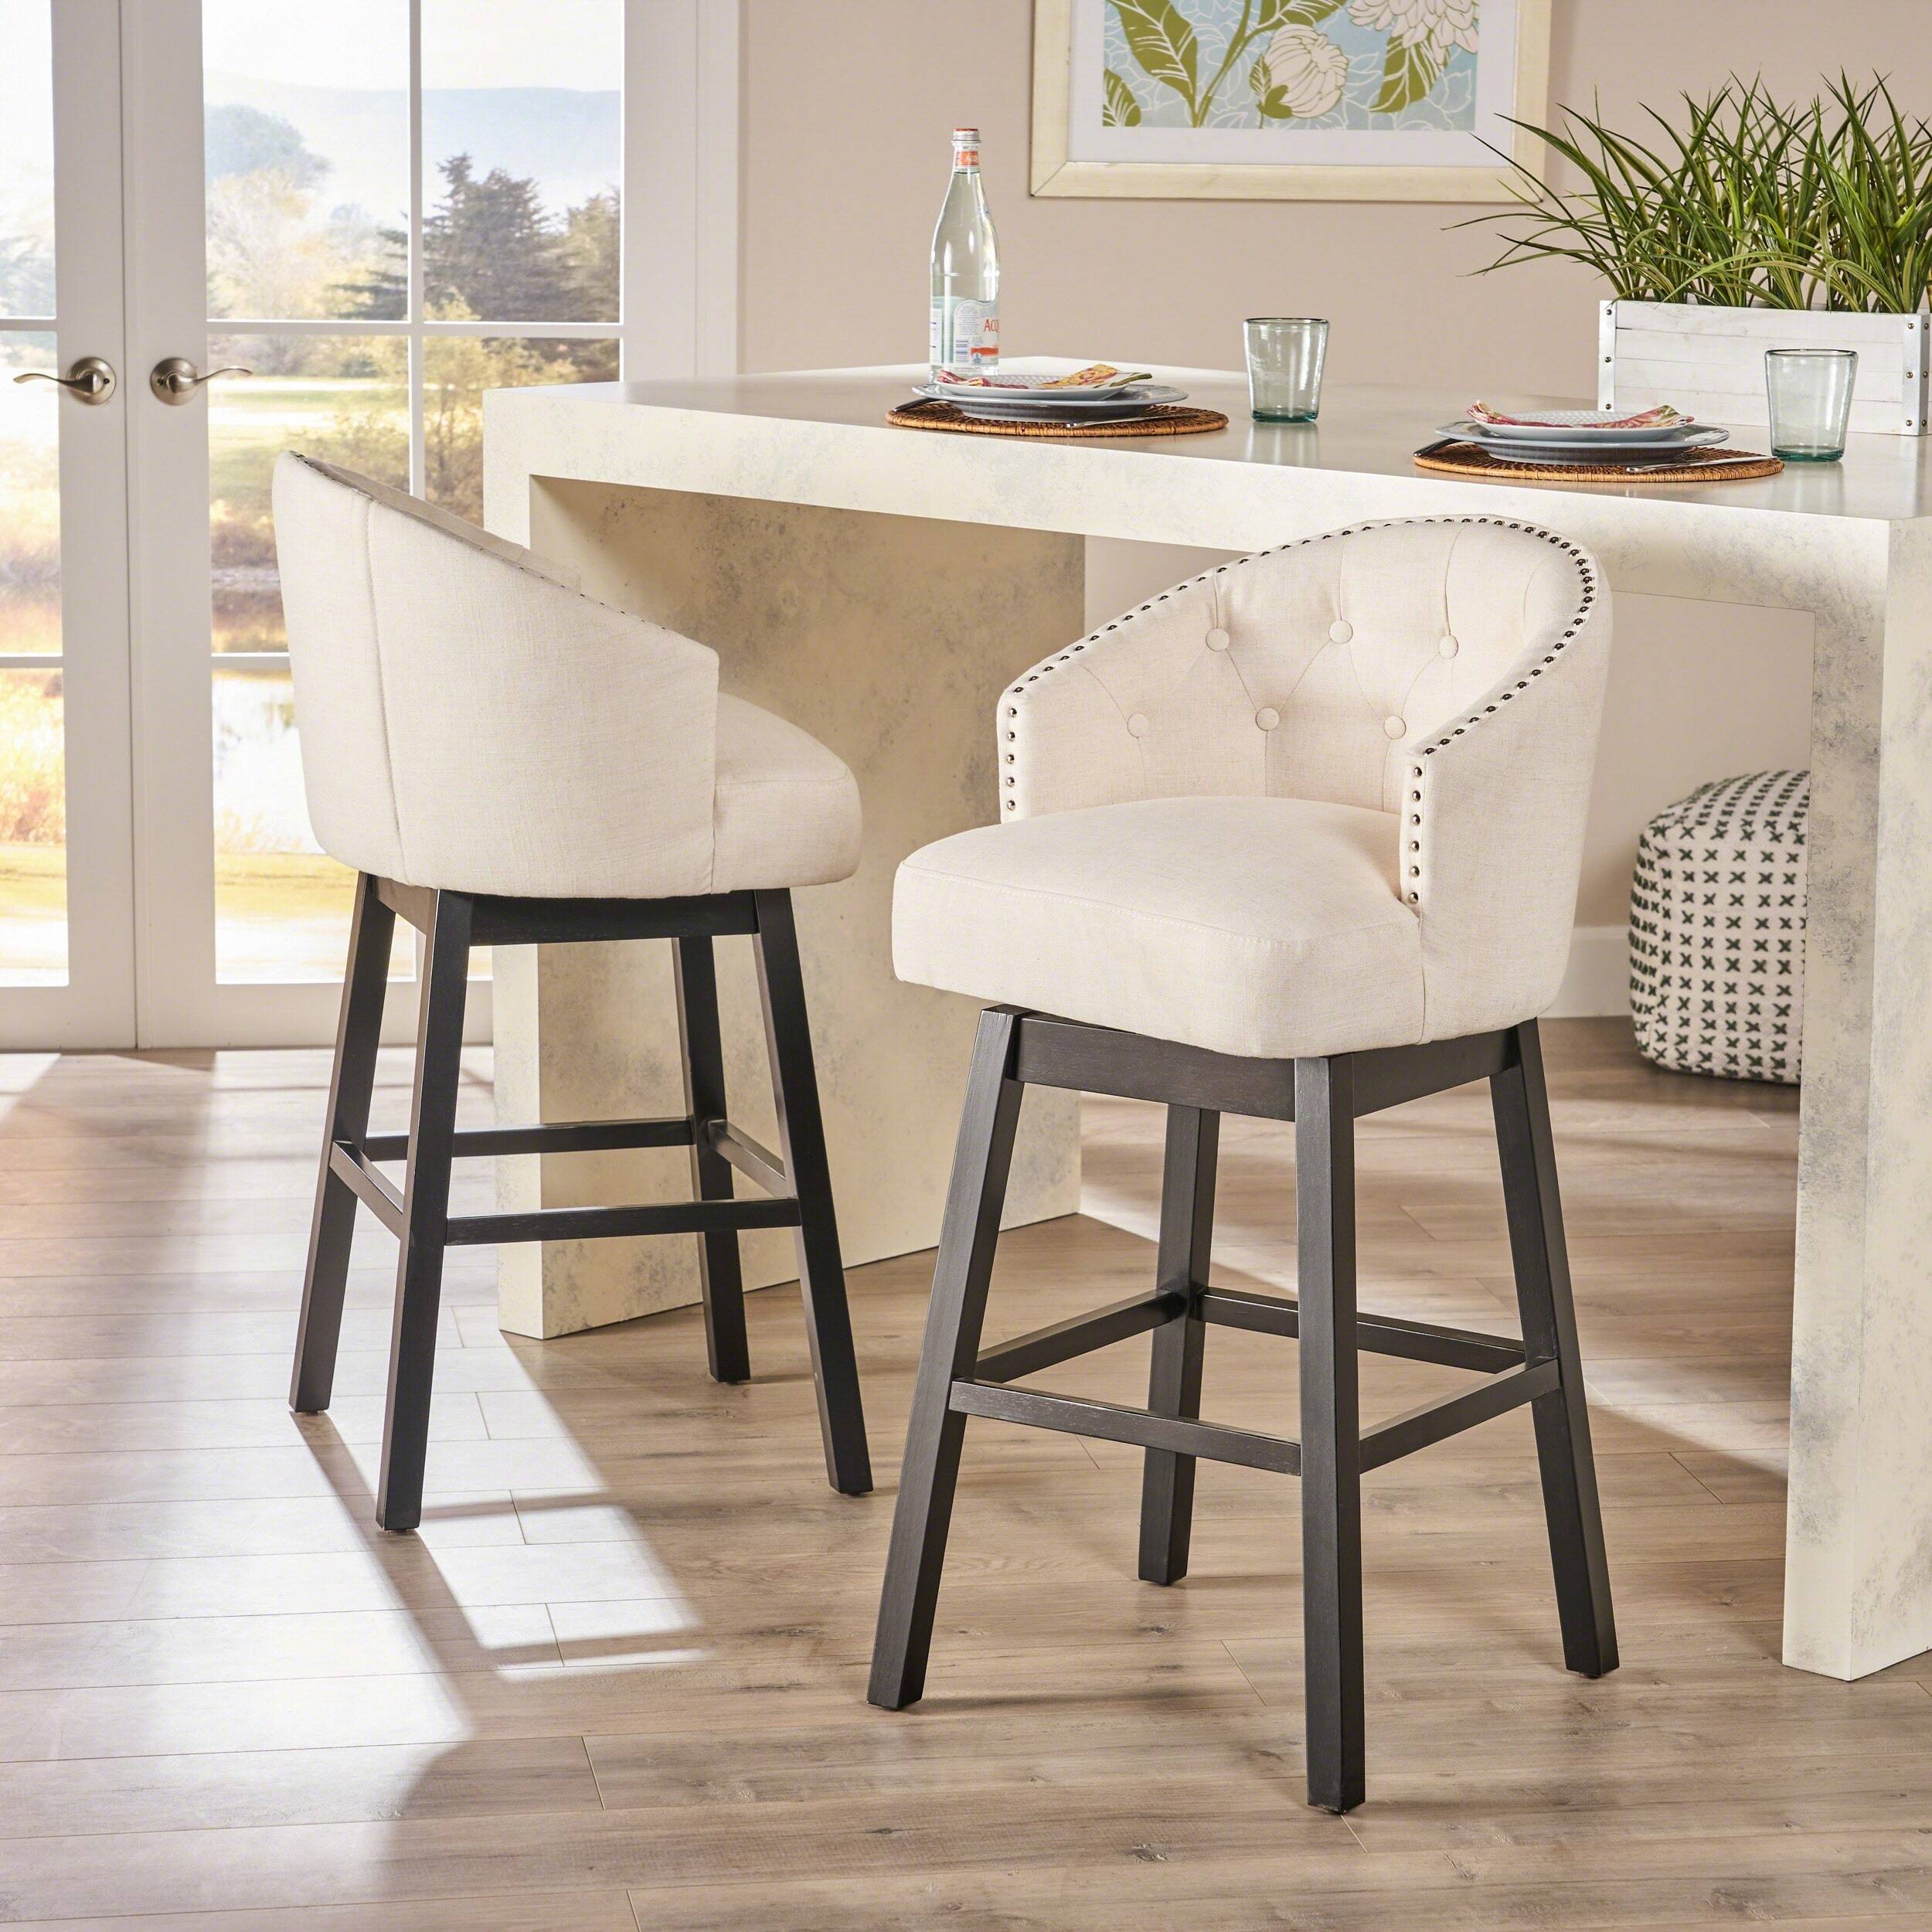 Vintage tufted comfortable bar stools with arms